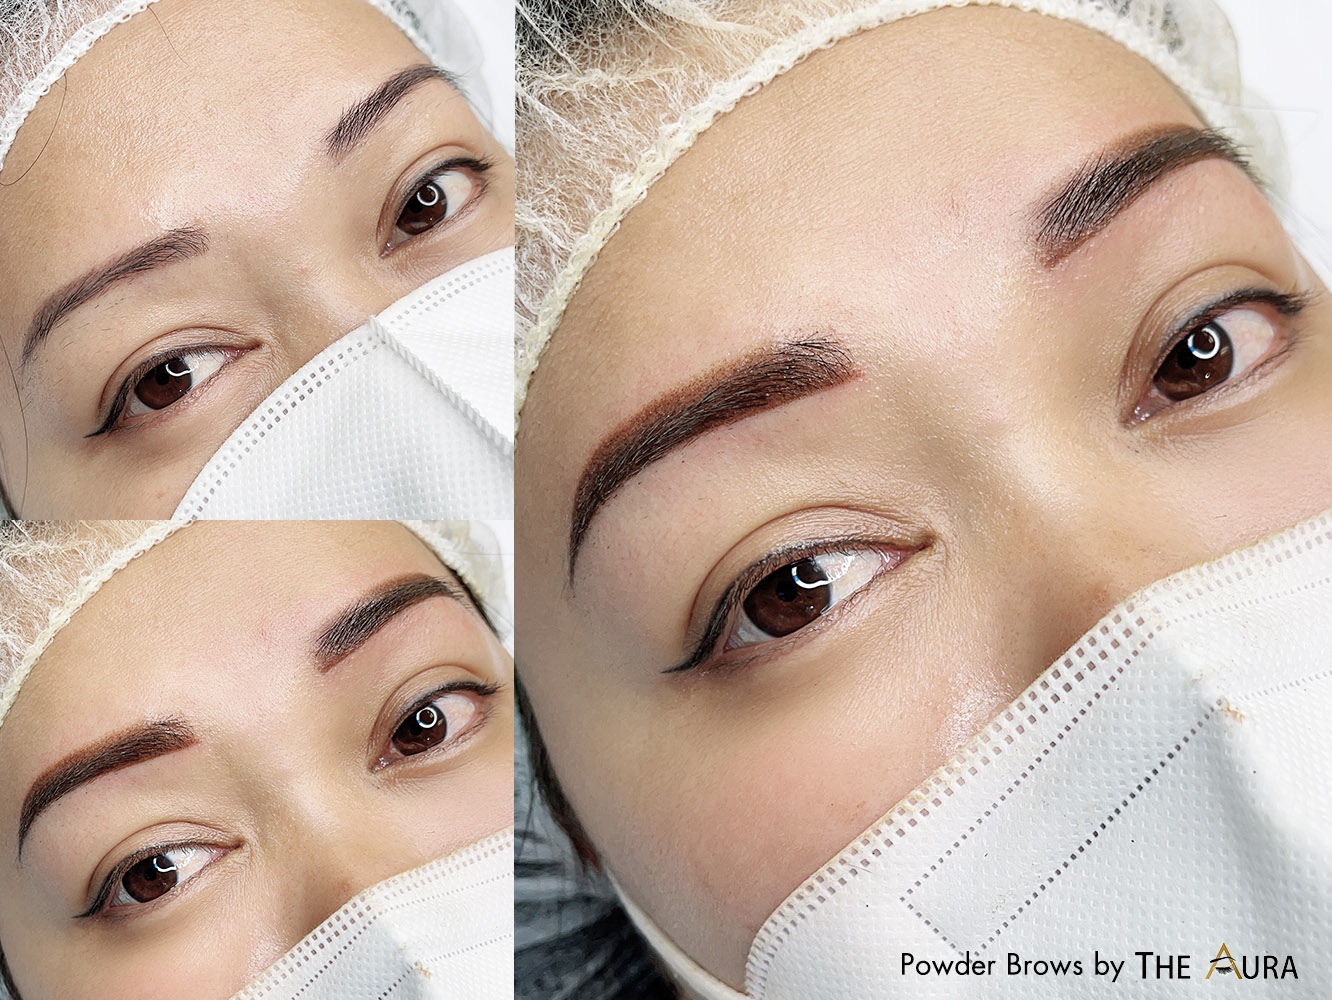 Powder Brows - Hot trend 2021 4